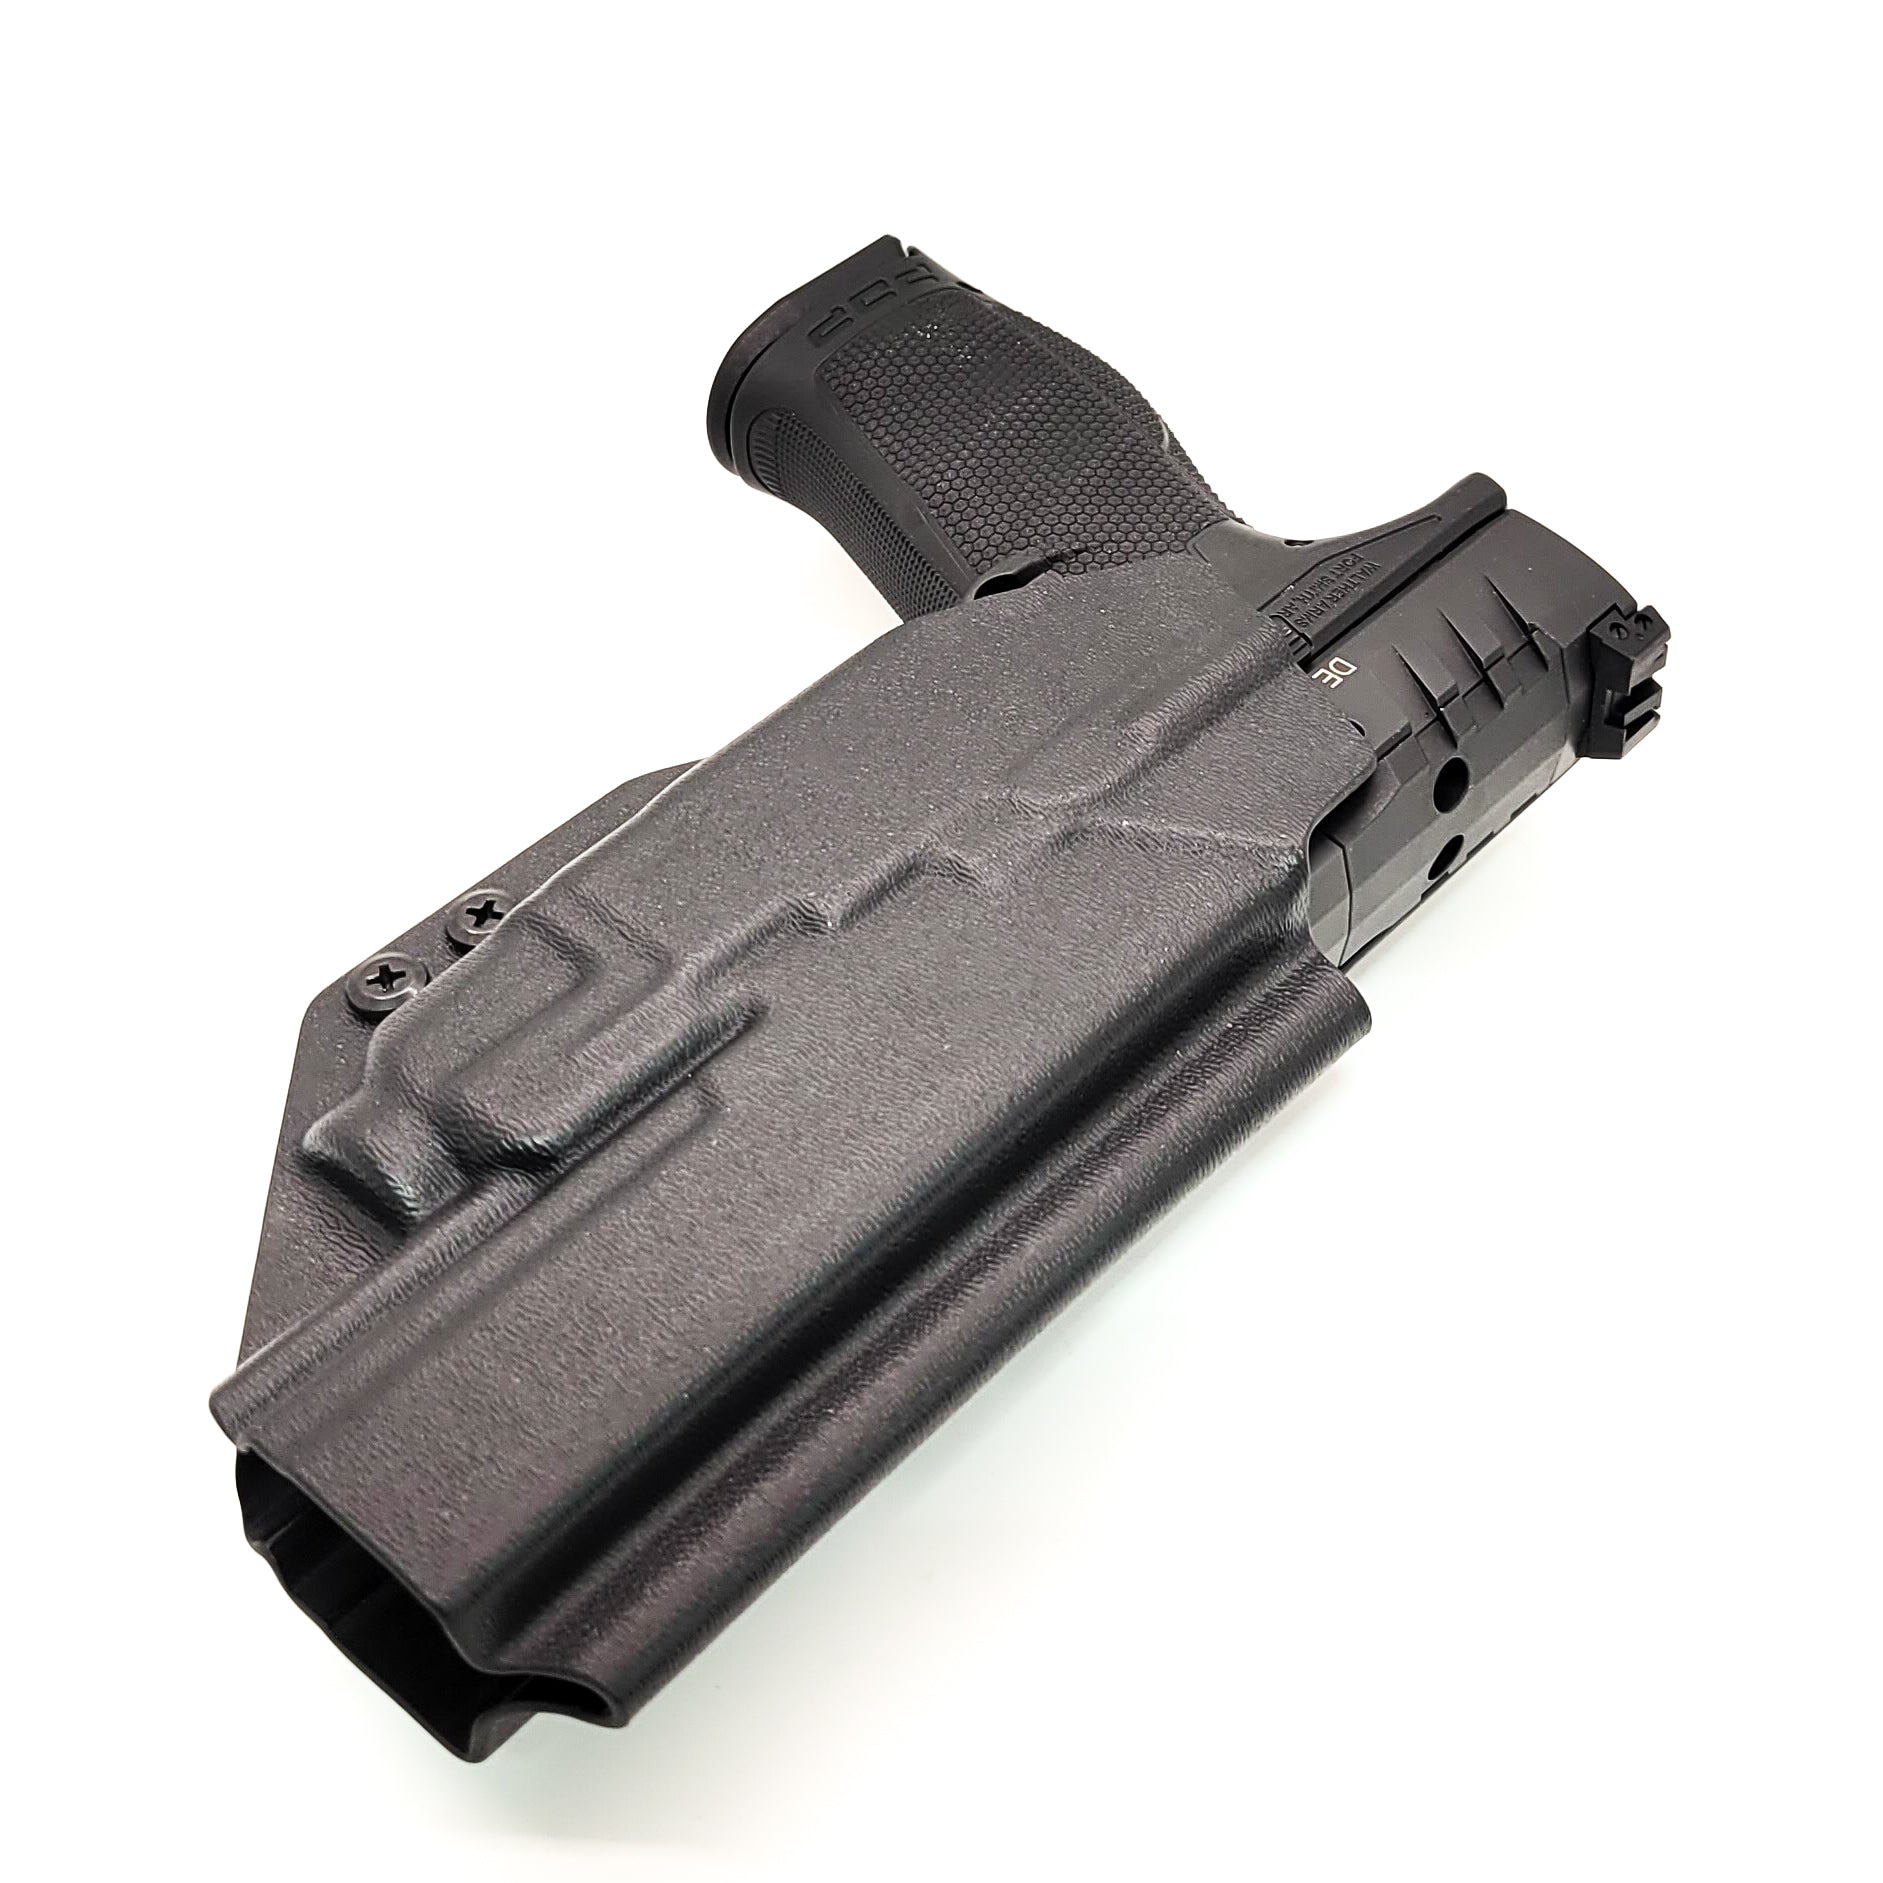 For the best Outside Waistband Taco Style Holster designed to fit the Walther PDP Pro SD 4.5" pistol with the Streamlight TLR-7A or TLR-7 mounted on the firearm, shop Four Brothers Holsters. Cut for red dot sight, full sweat guard, adjustable retention & open muzzle for threaded barrels & compensators. 